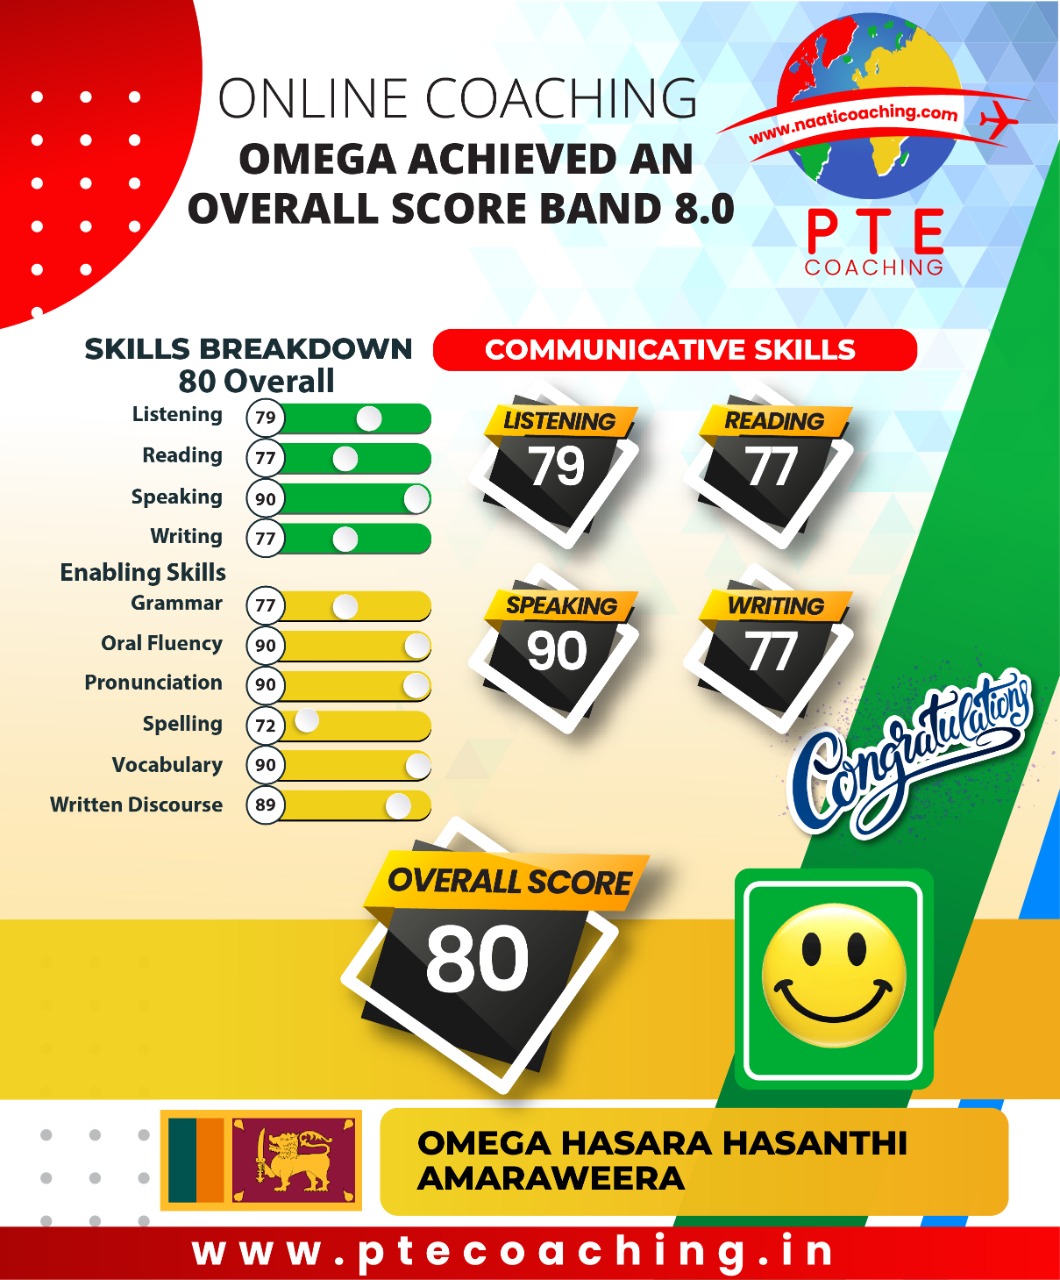 PTE Coaching Scorecard - Omega achieved an overall score band 8.0